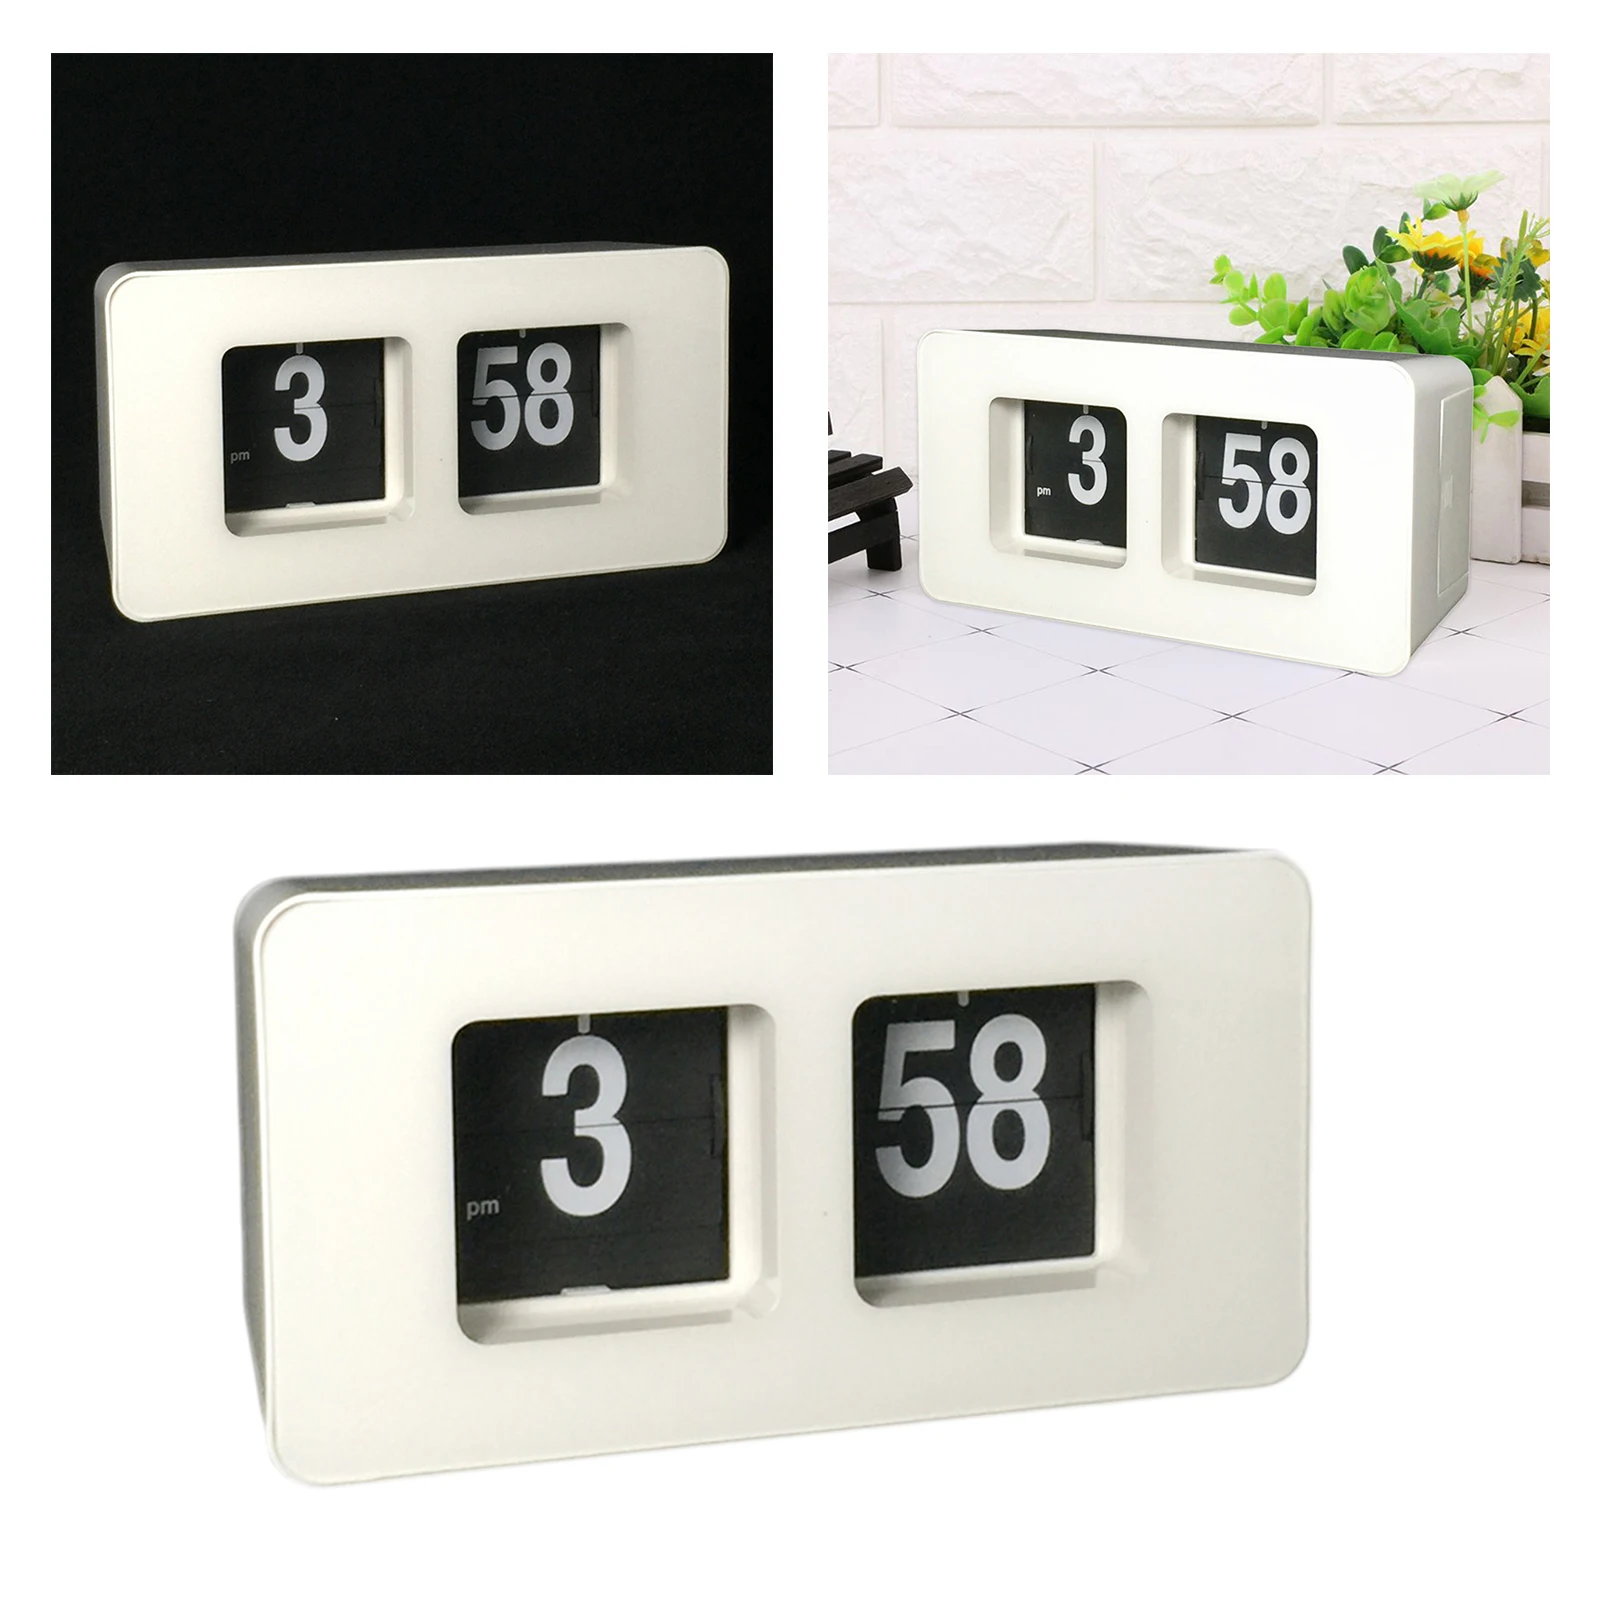 Auto Flip Clock Stylish Modern Vintage Clock Desk Table File Down Page Clock Digital for Bedroom Kitchen Office Cars Home Cafe